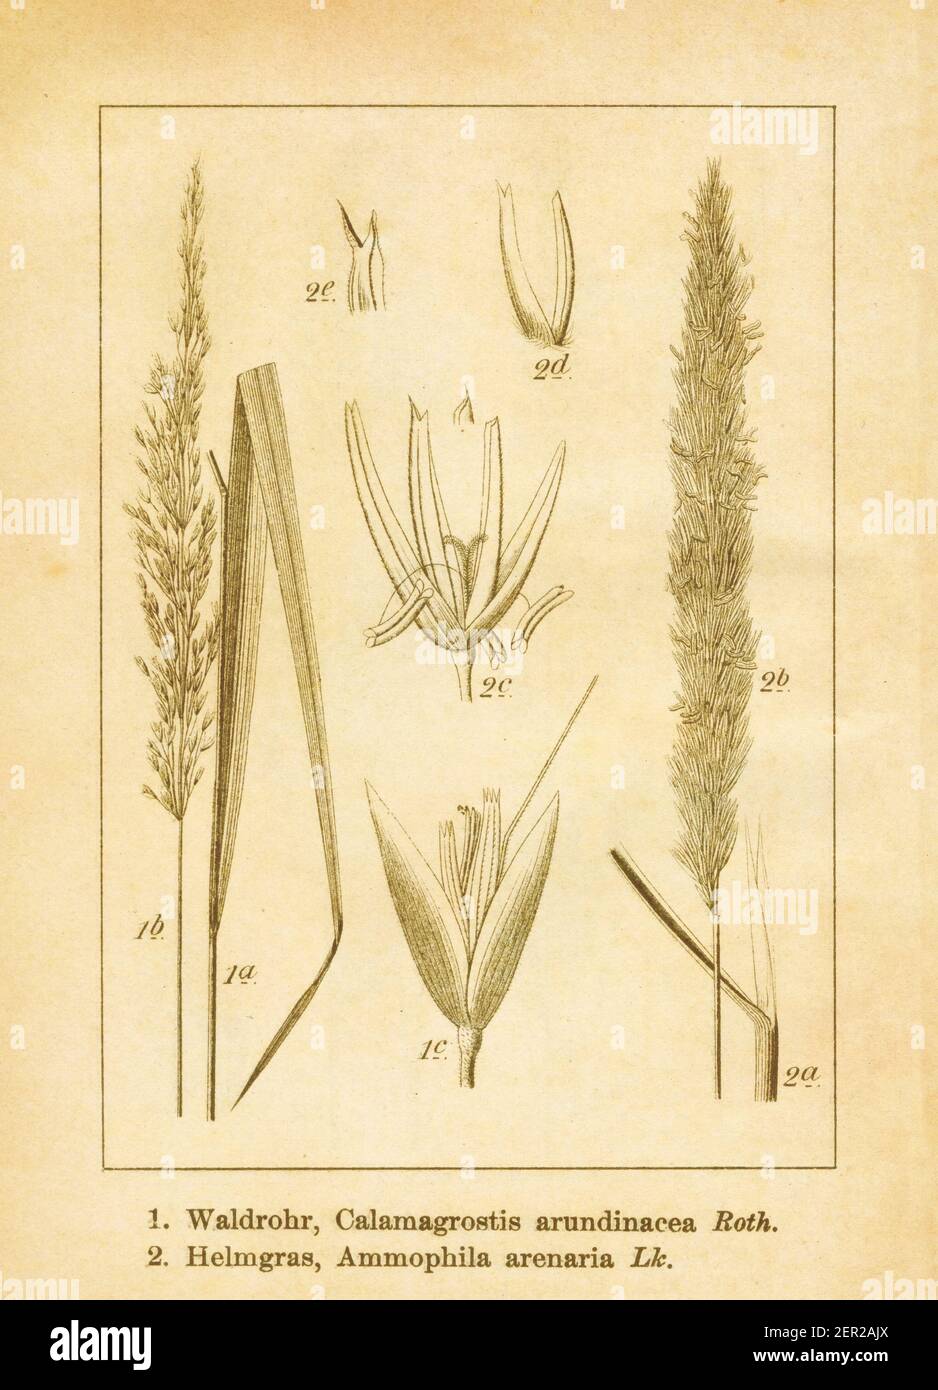 Antique illustration of a calamagrostis arundinacea and ammophila arenaria (also known as European marram grass or European beachgrass). Engraved by J Stock Photo